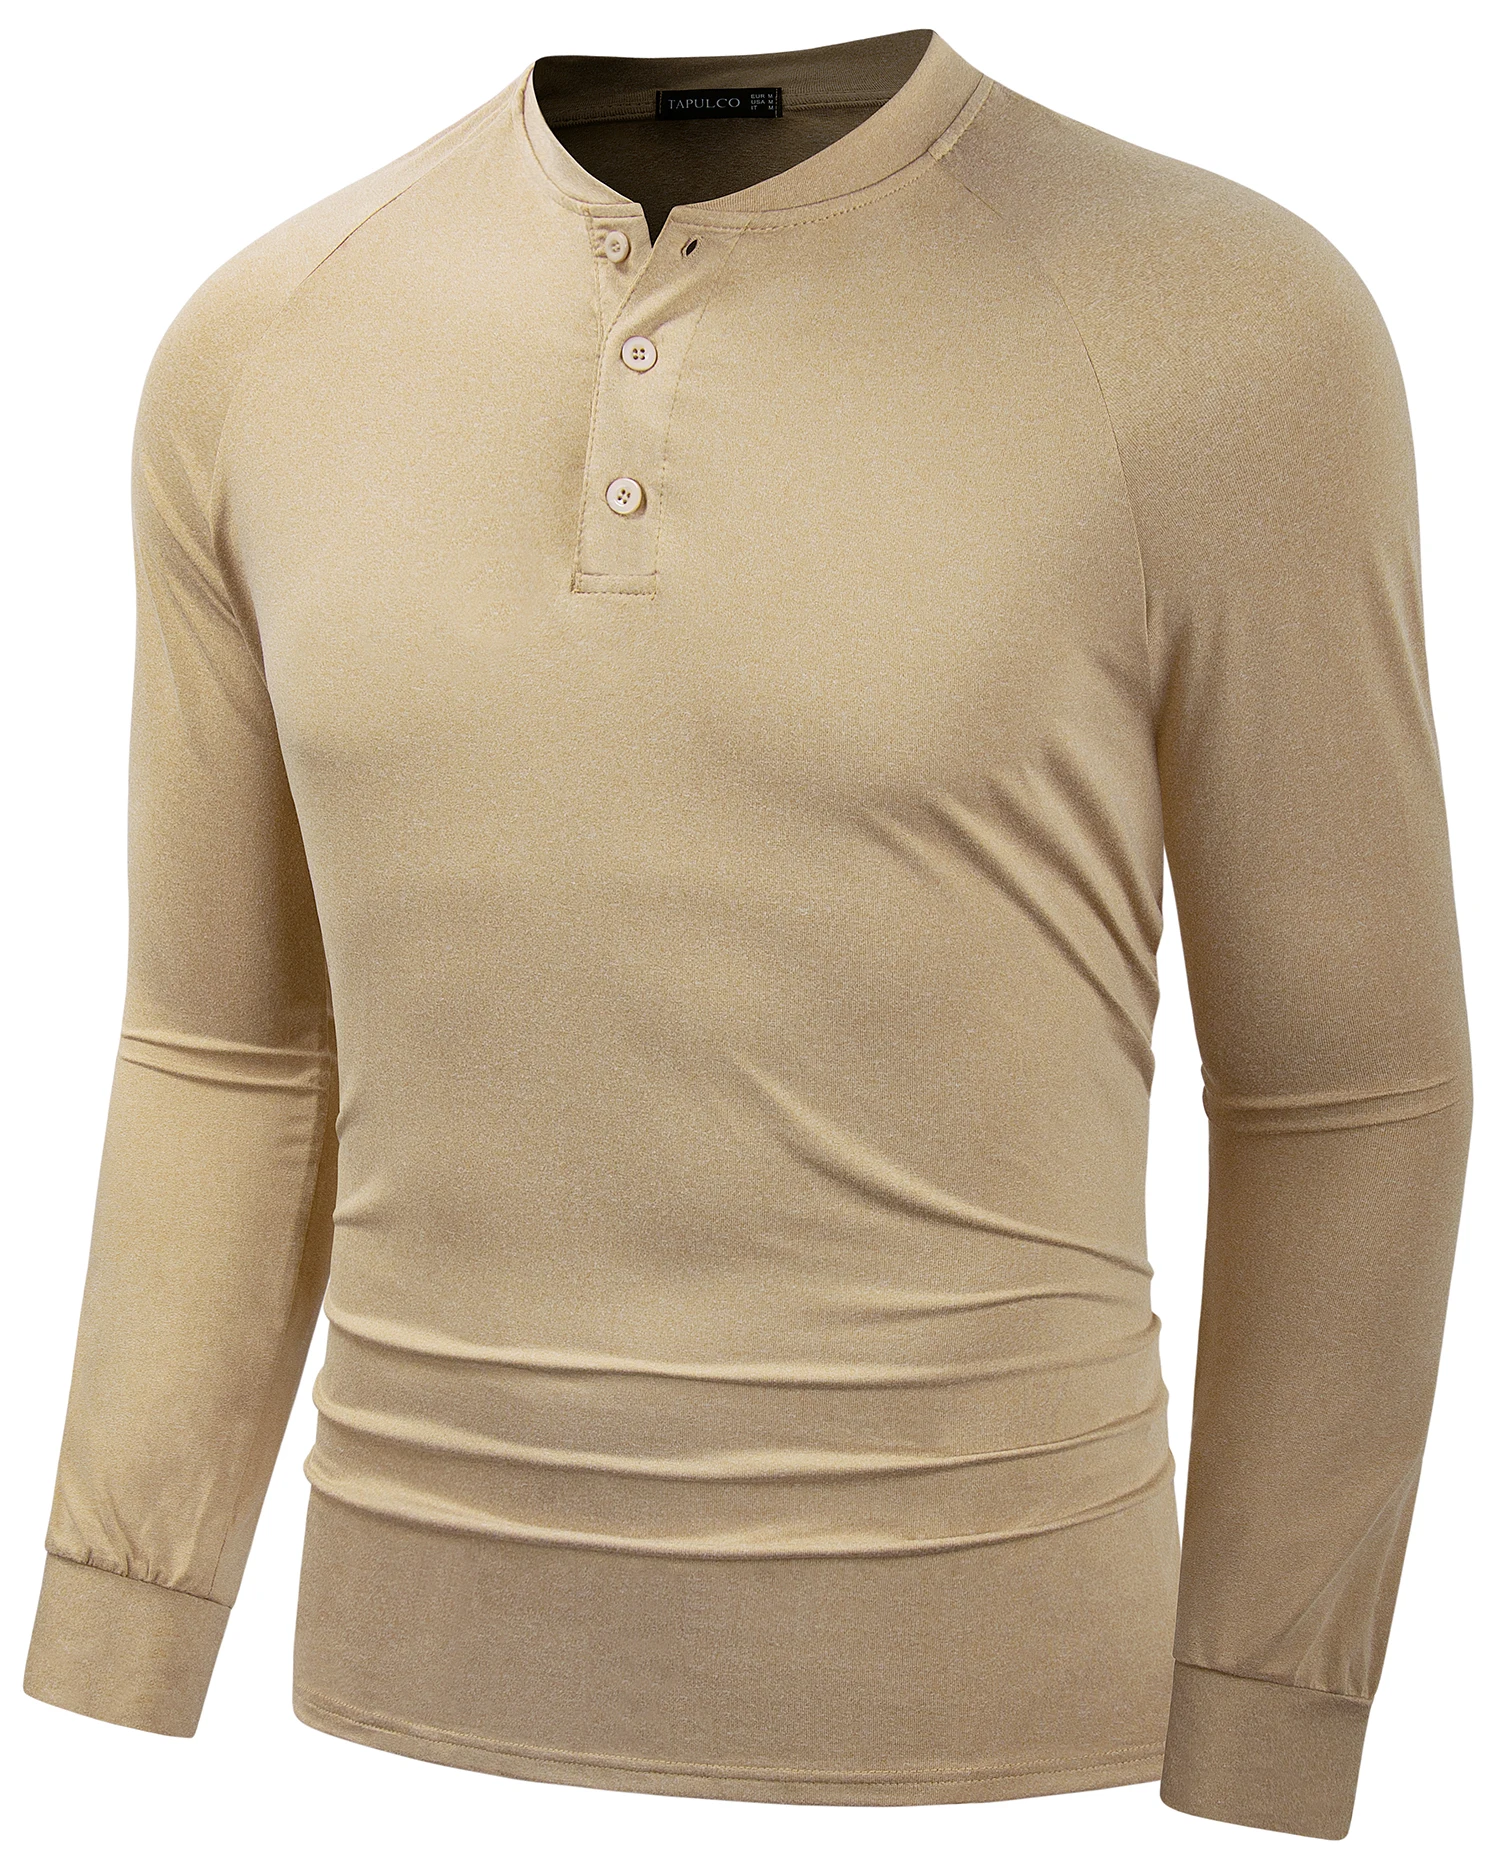 Mens Basic Henley Shirts Long Sleeve Stretchy Comfy Classic Casual Daily Collarless T-Shirts